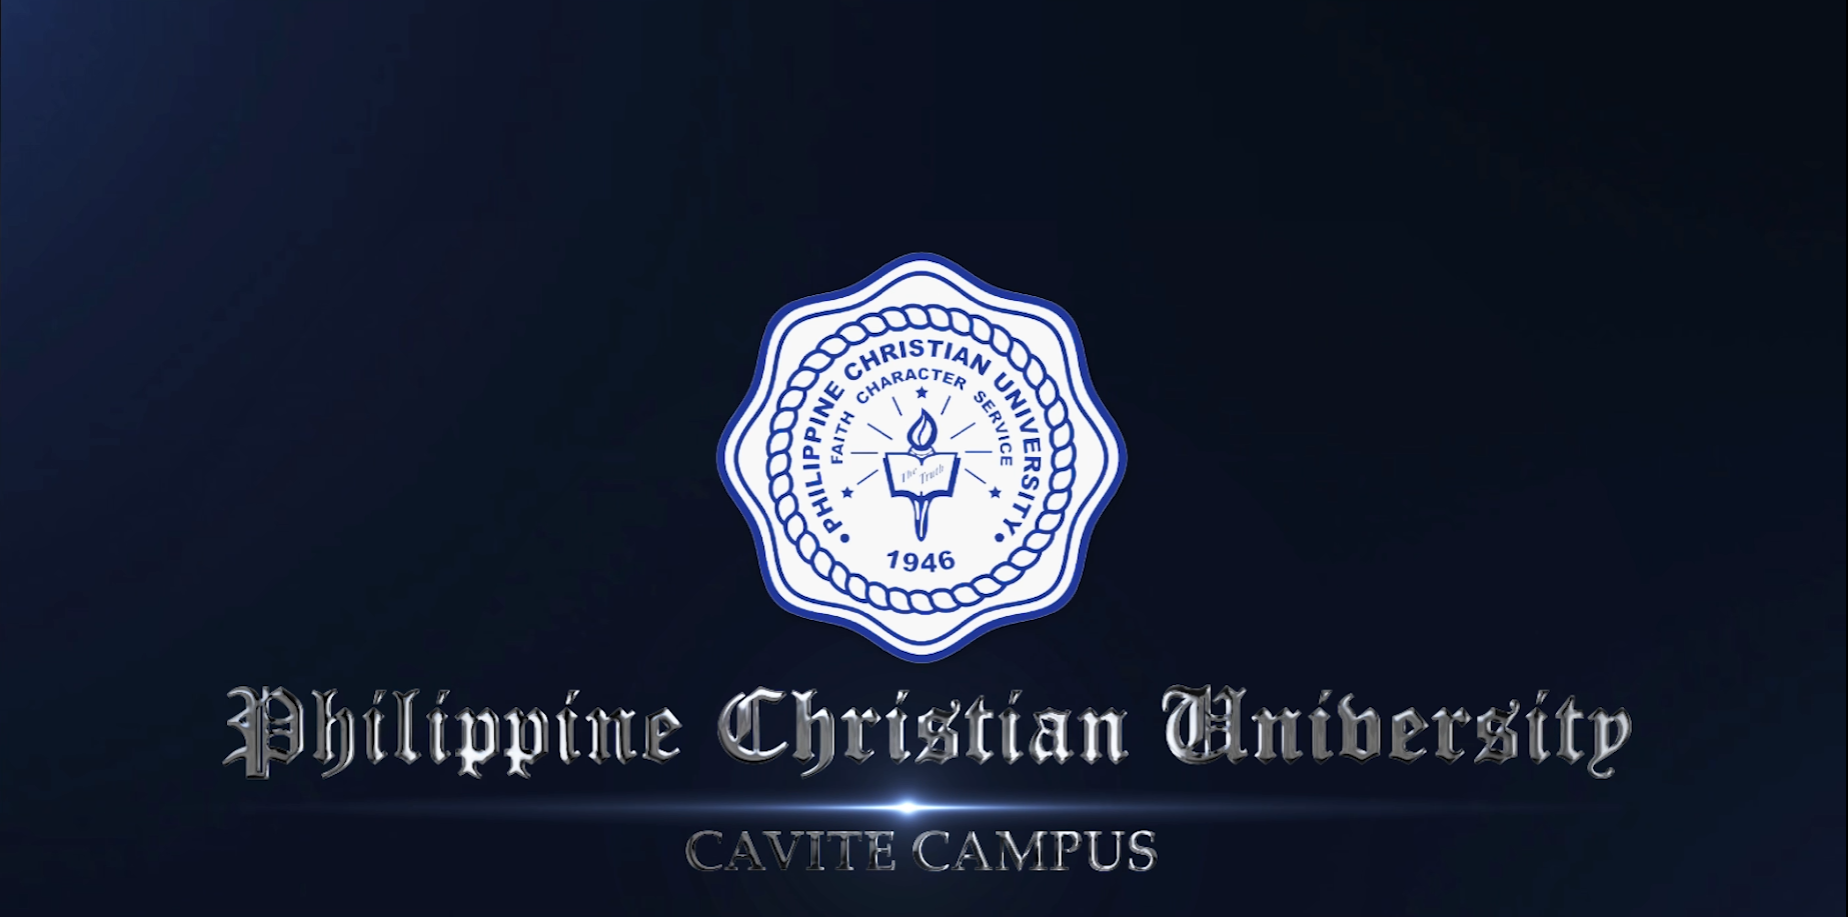 Journey to the south: Philippine Christian University - Cavite Campus